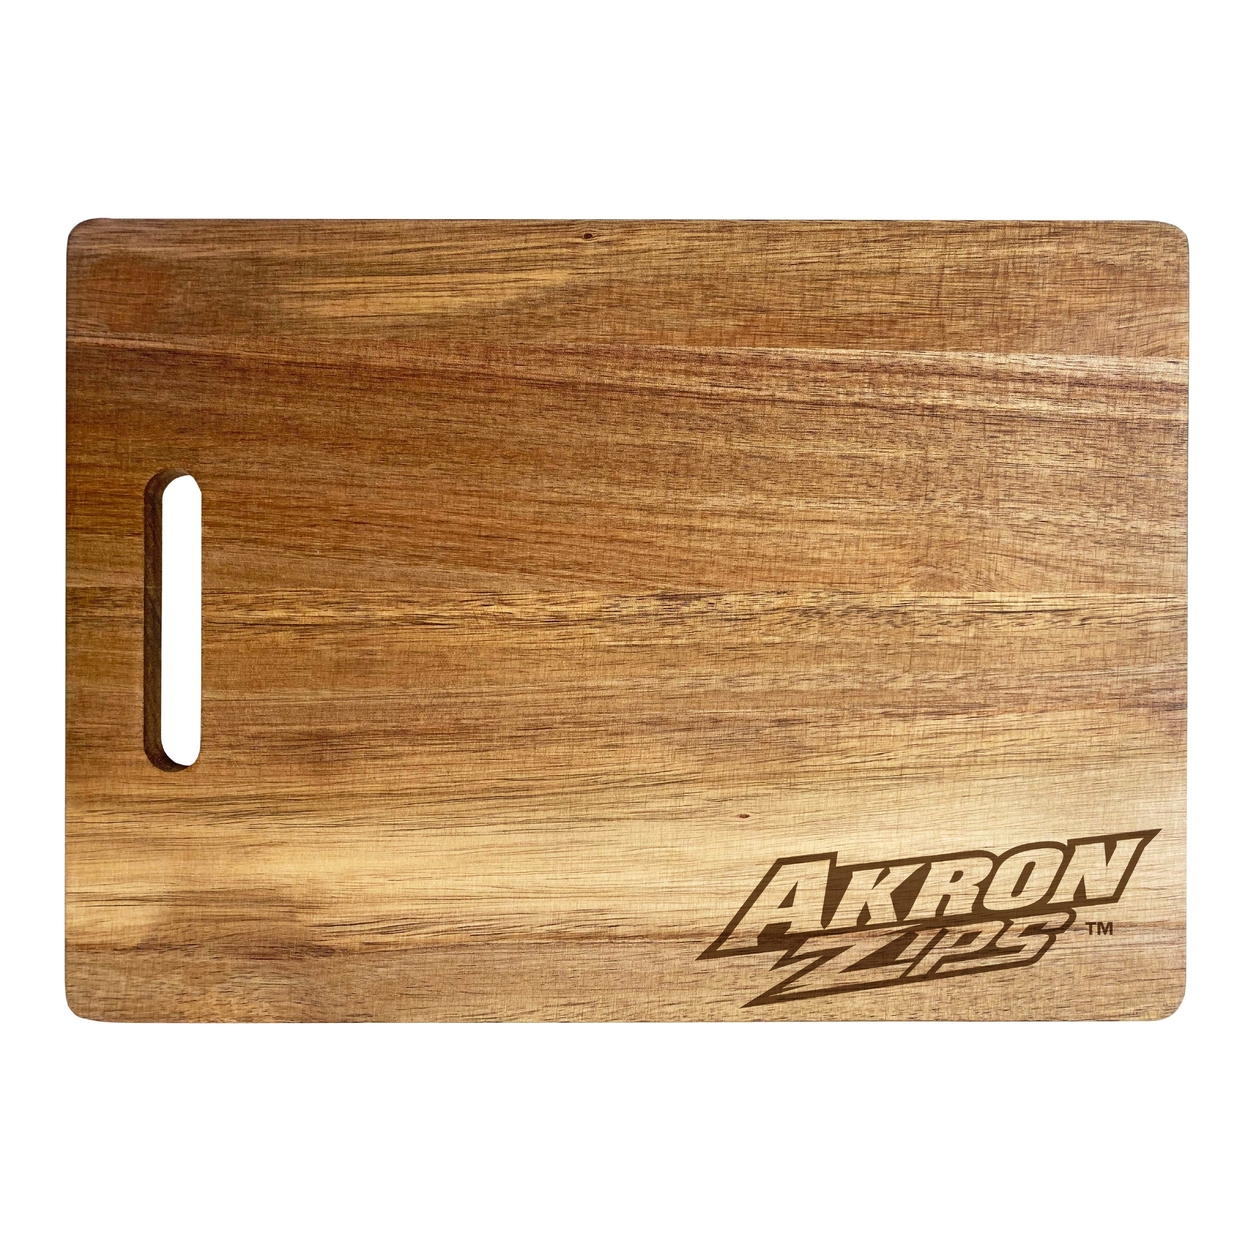 Akron Zips Engraved Wooden Cutting Board 10 X 14 Acacia Wood - Small Engraving